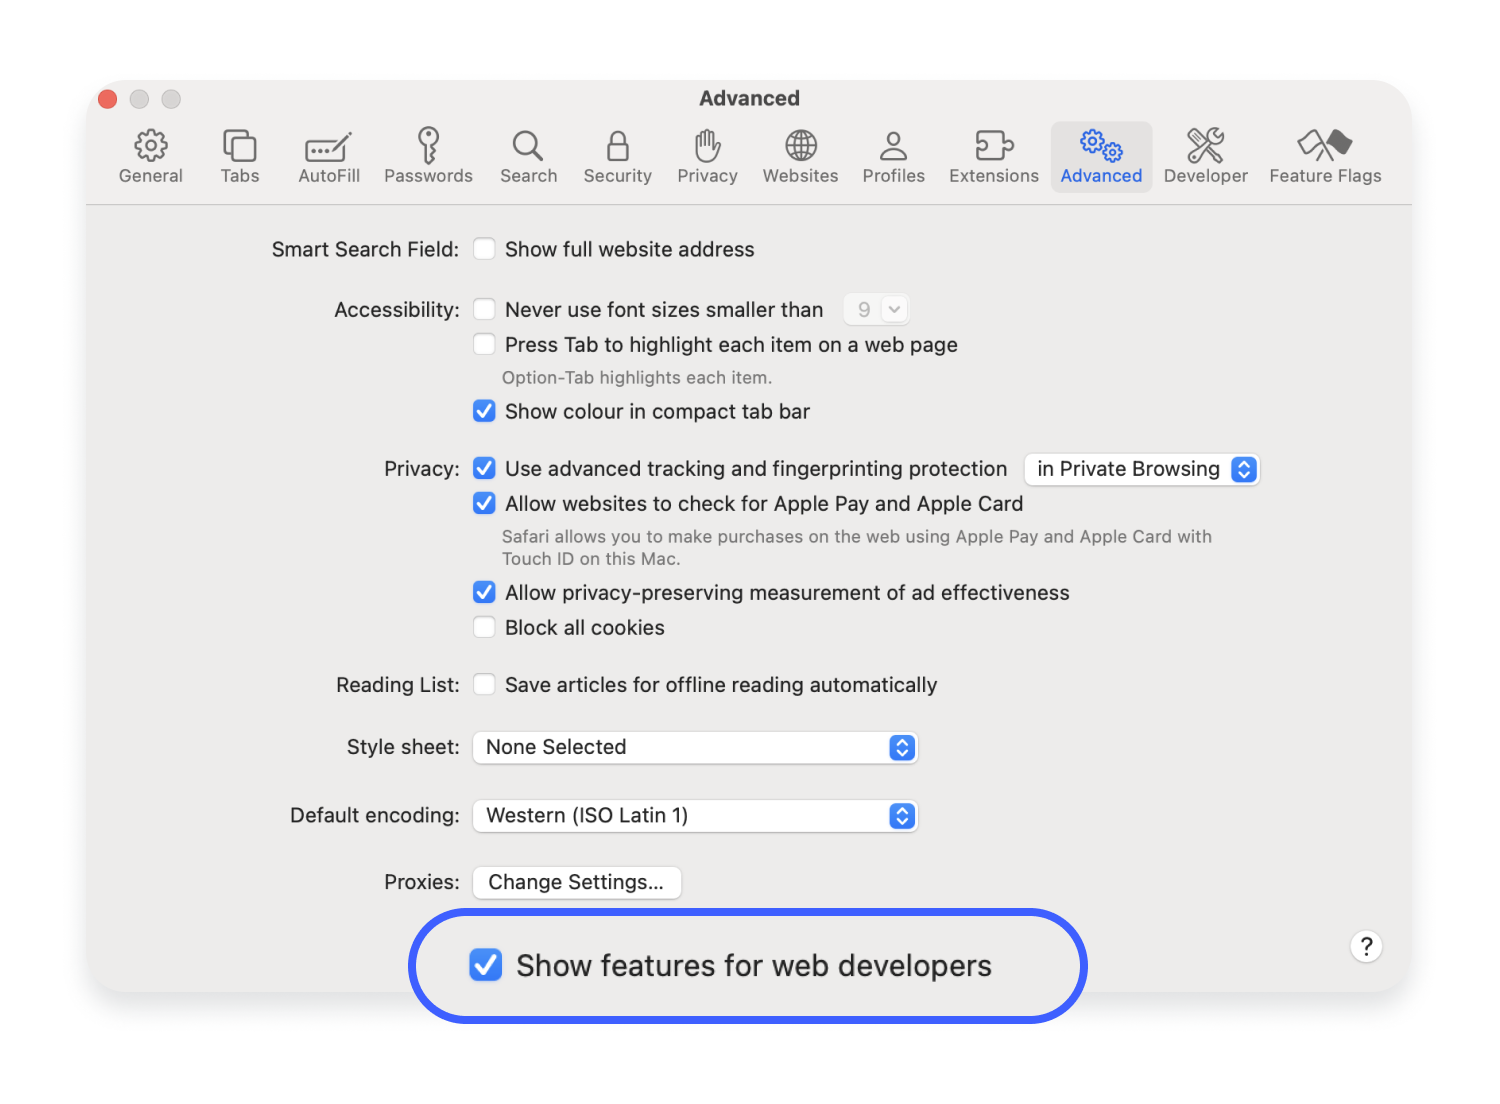 Safari features for web developers